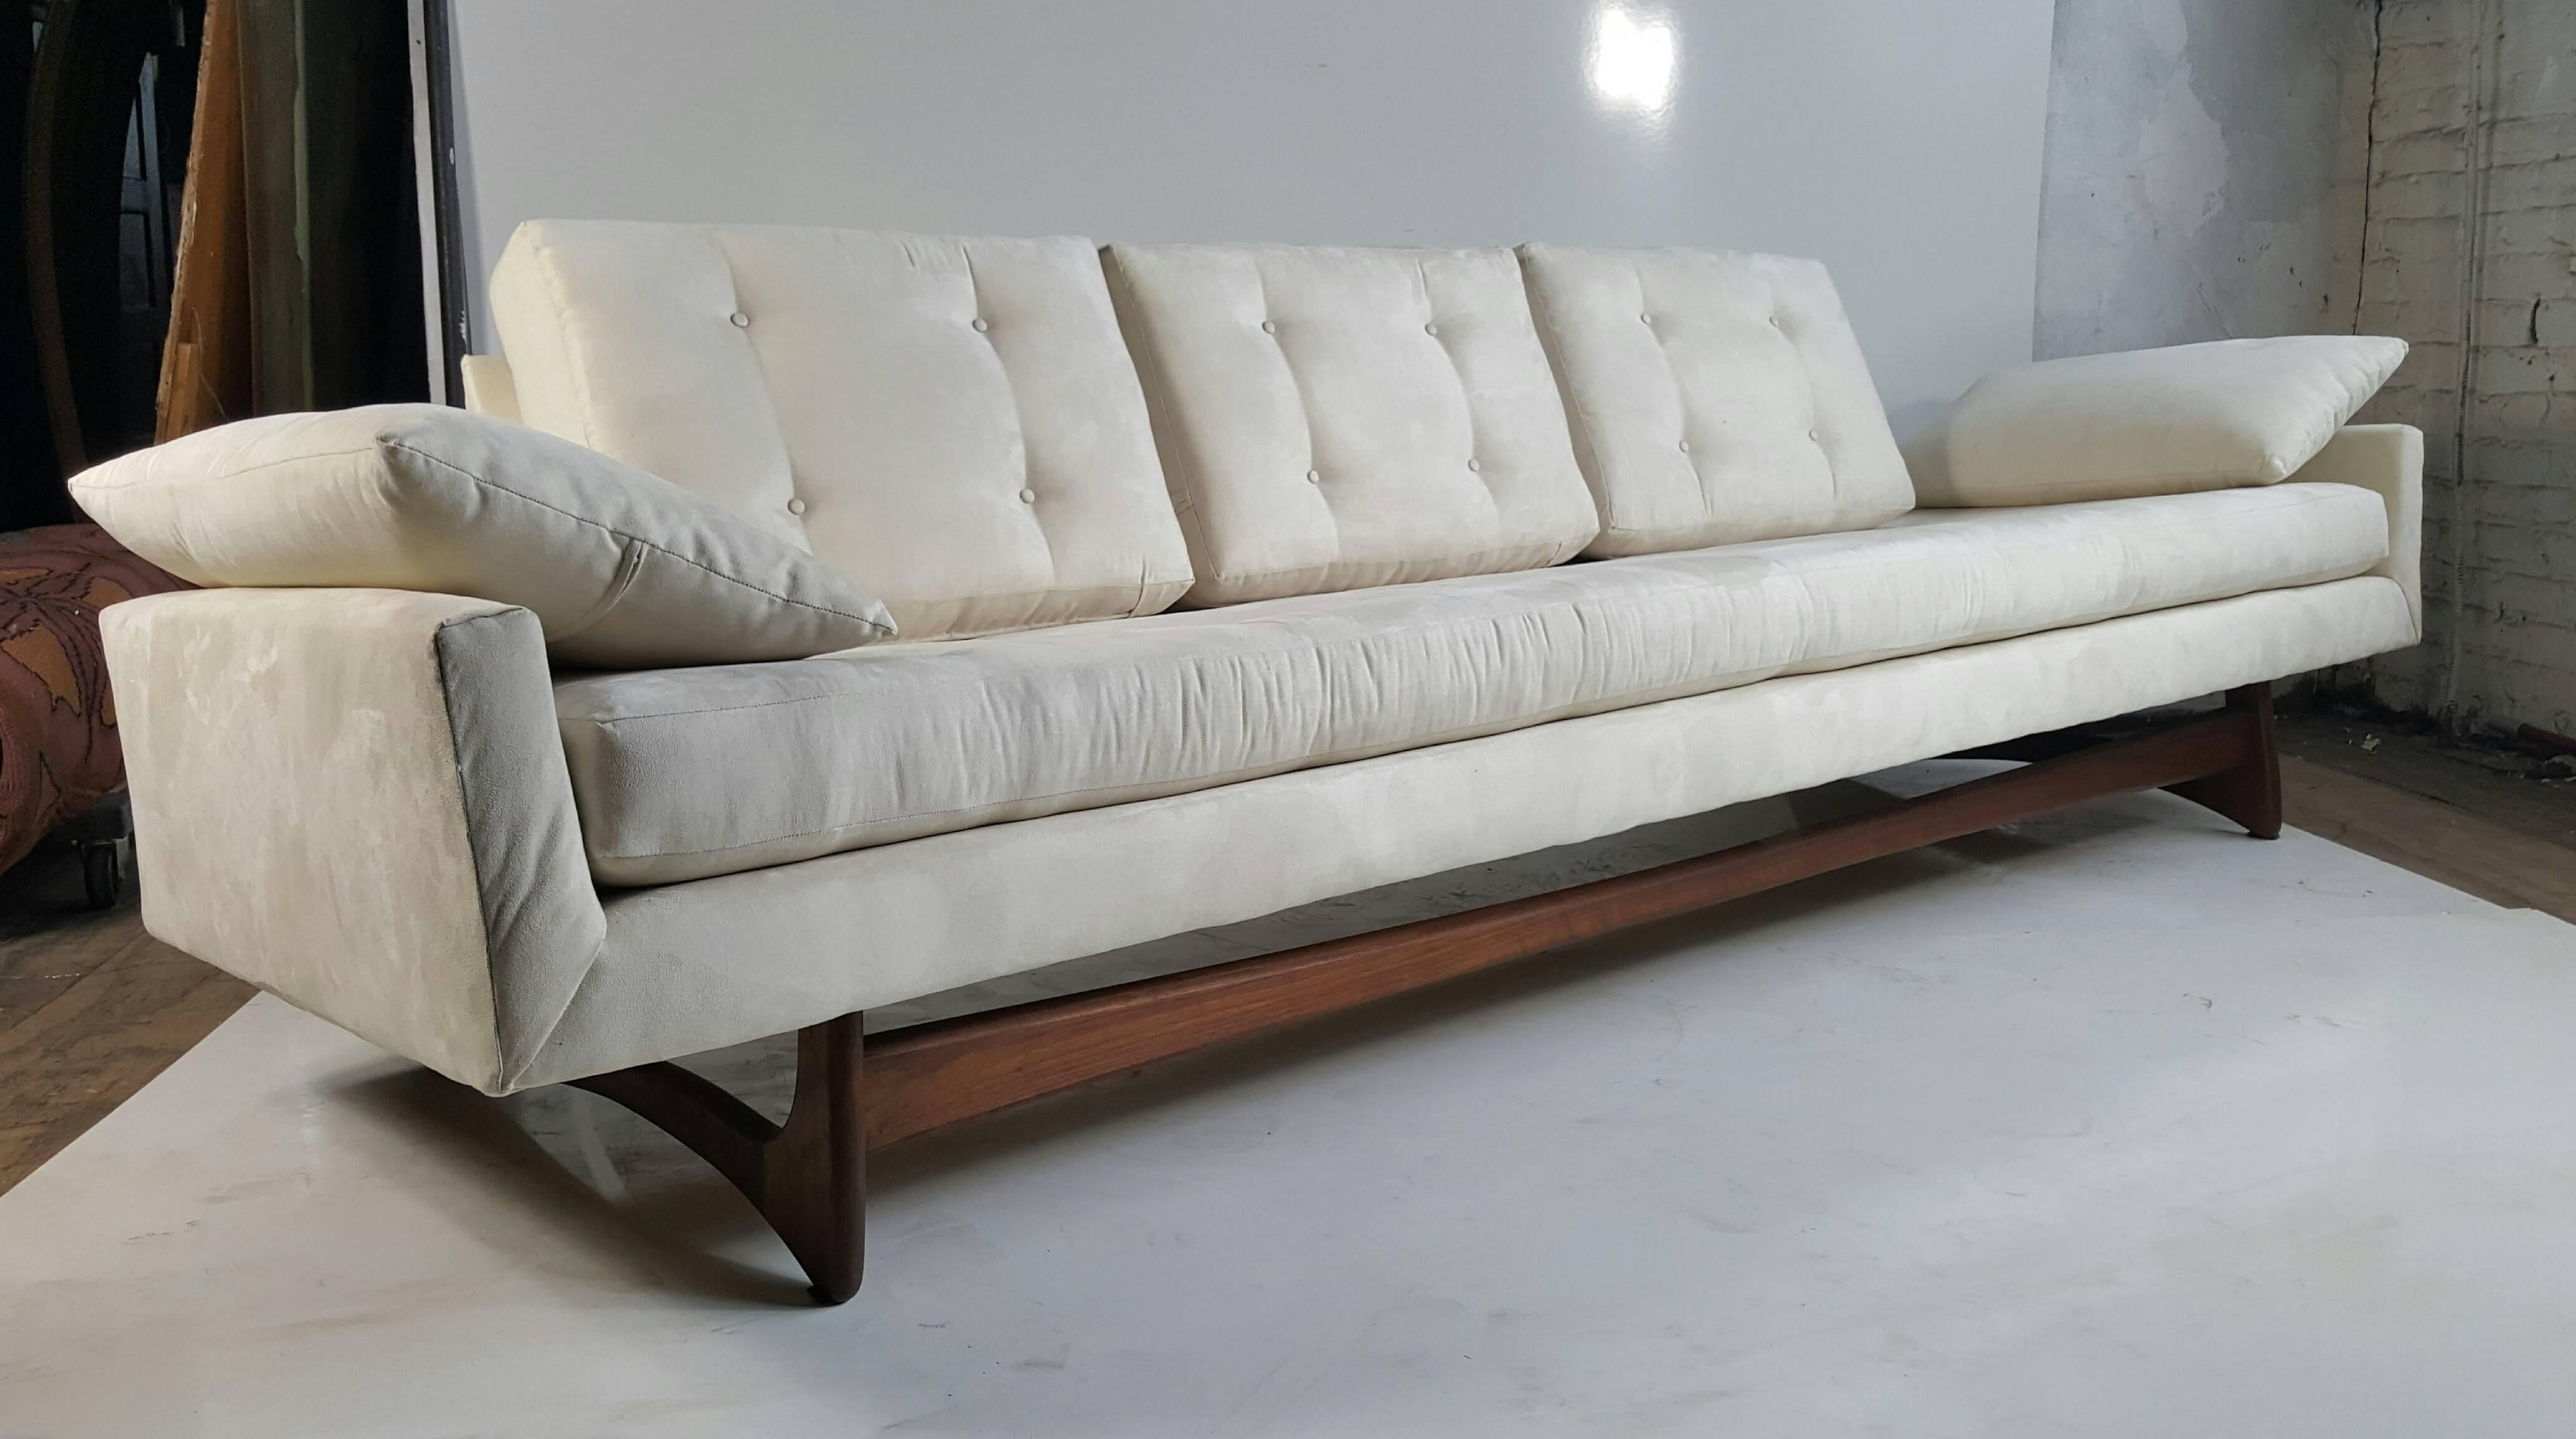 Classic Mid-Century Modern sofa made by Craft Associates, designed by Adrian Pearsall reflects the stunning sleek, elegant lines of Mid-Century design while remaining highly appropriate for contemporary life. Recently upholstered in beautiful